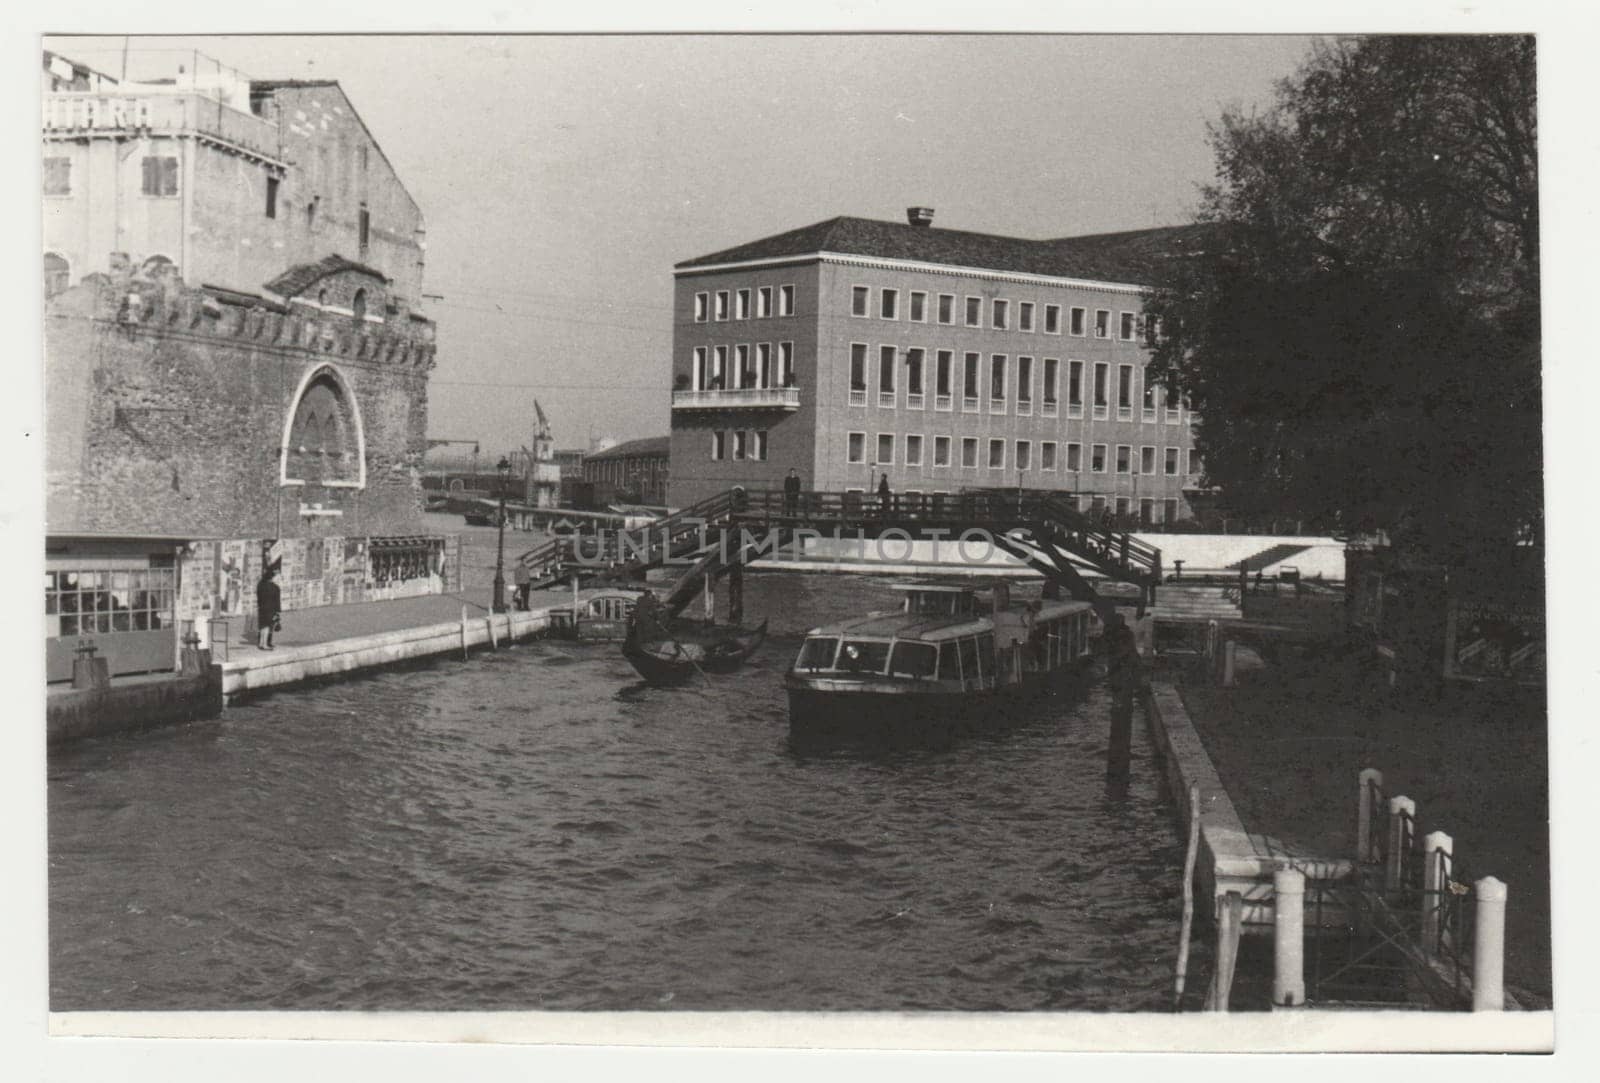 Vintage photo shows the Italian town - Venice. Retro black and white photography. Circa 1970s. by roman_nerud